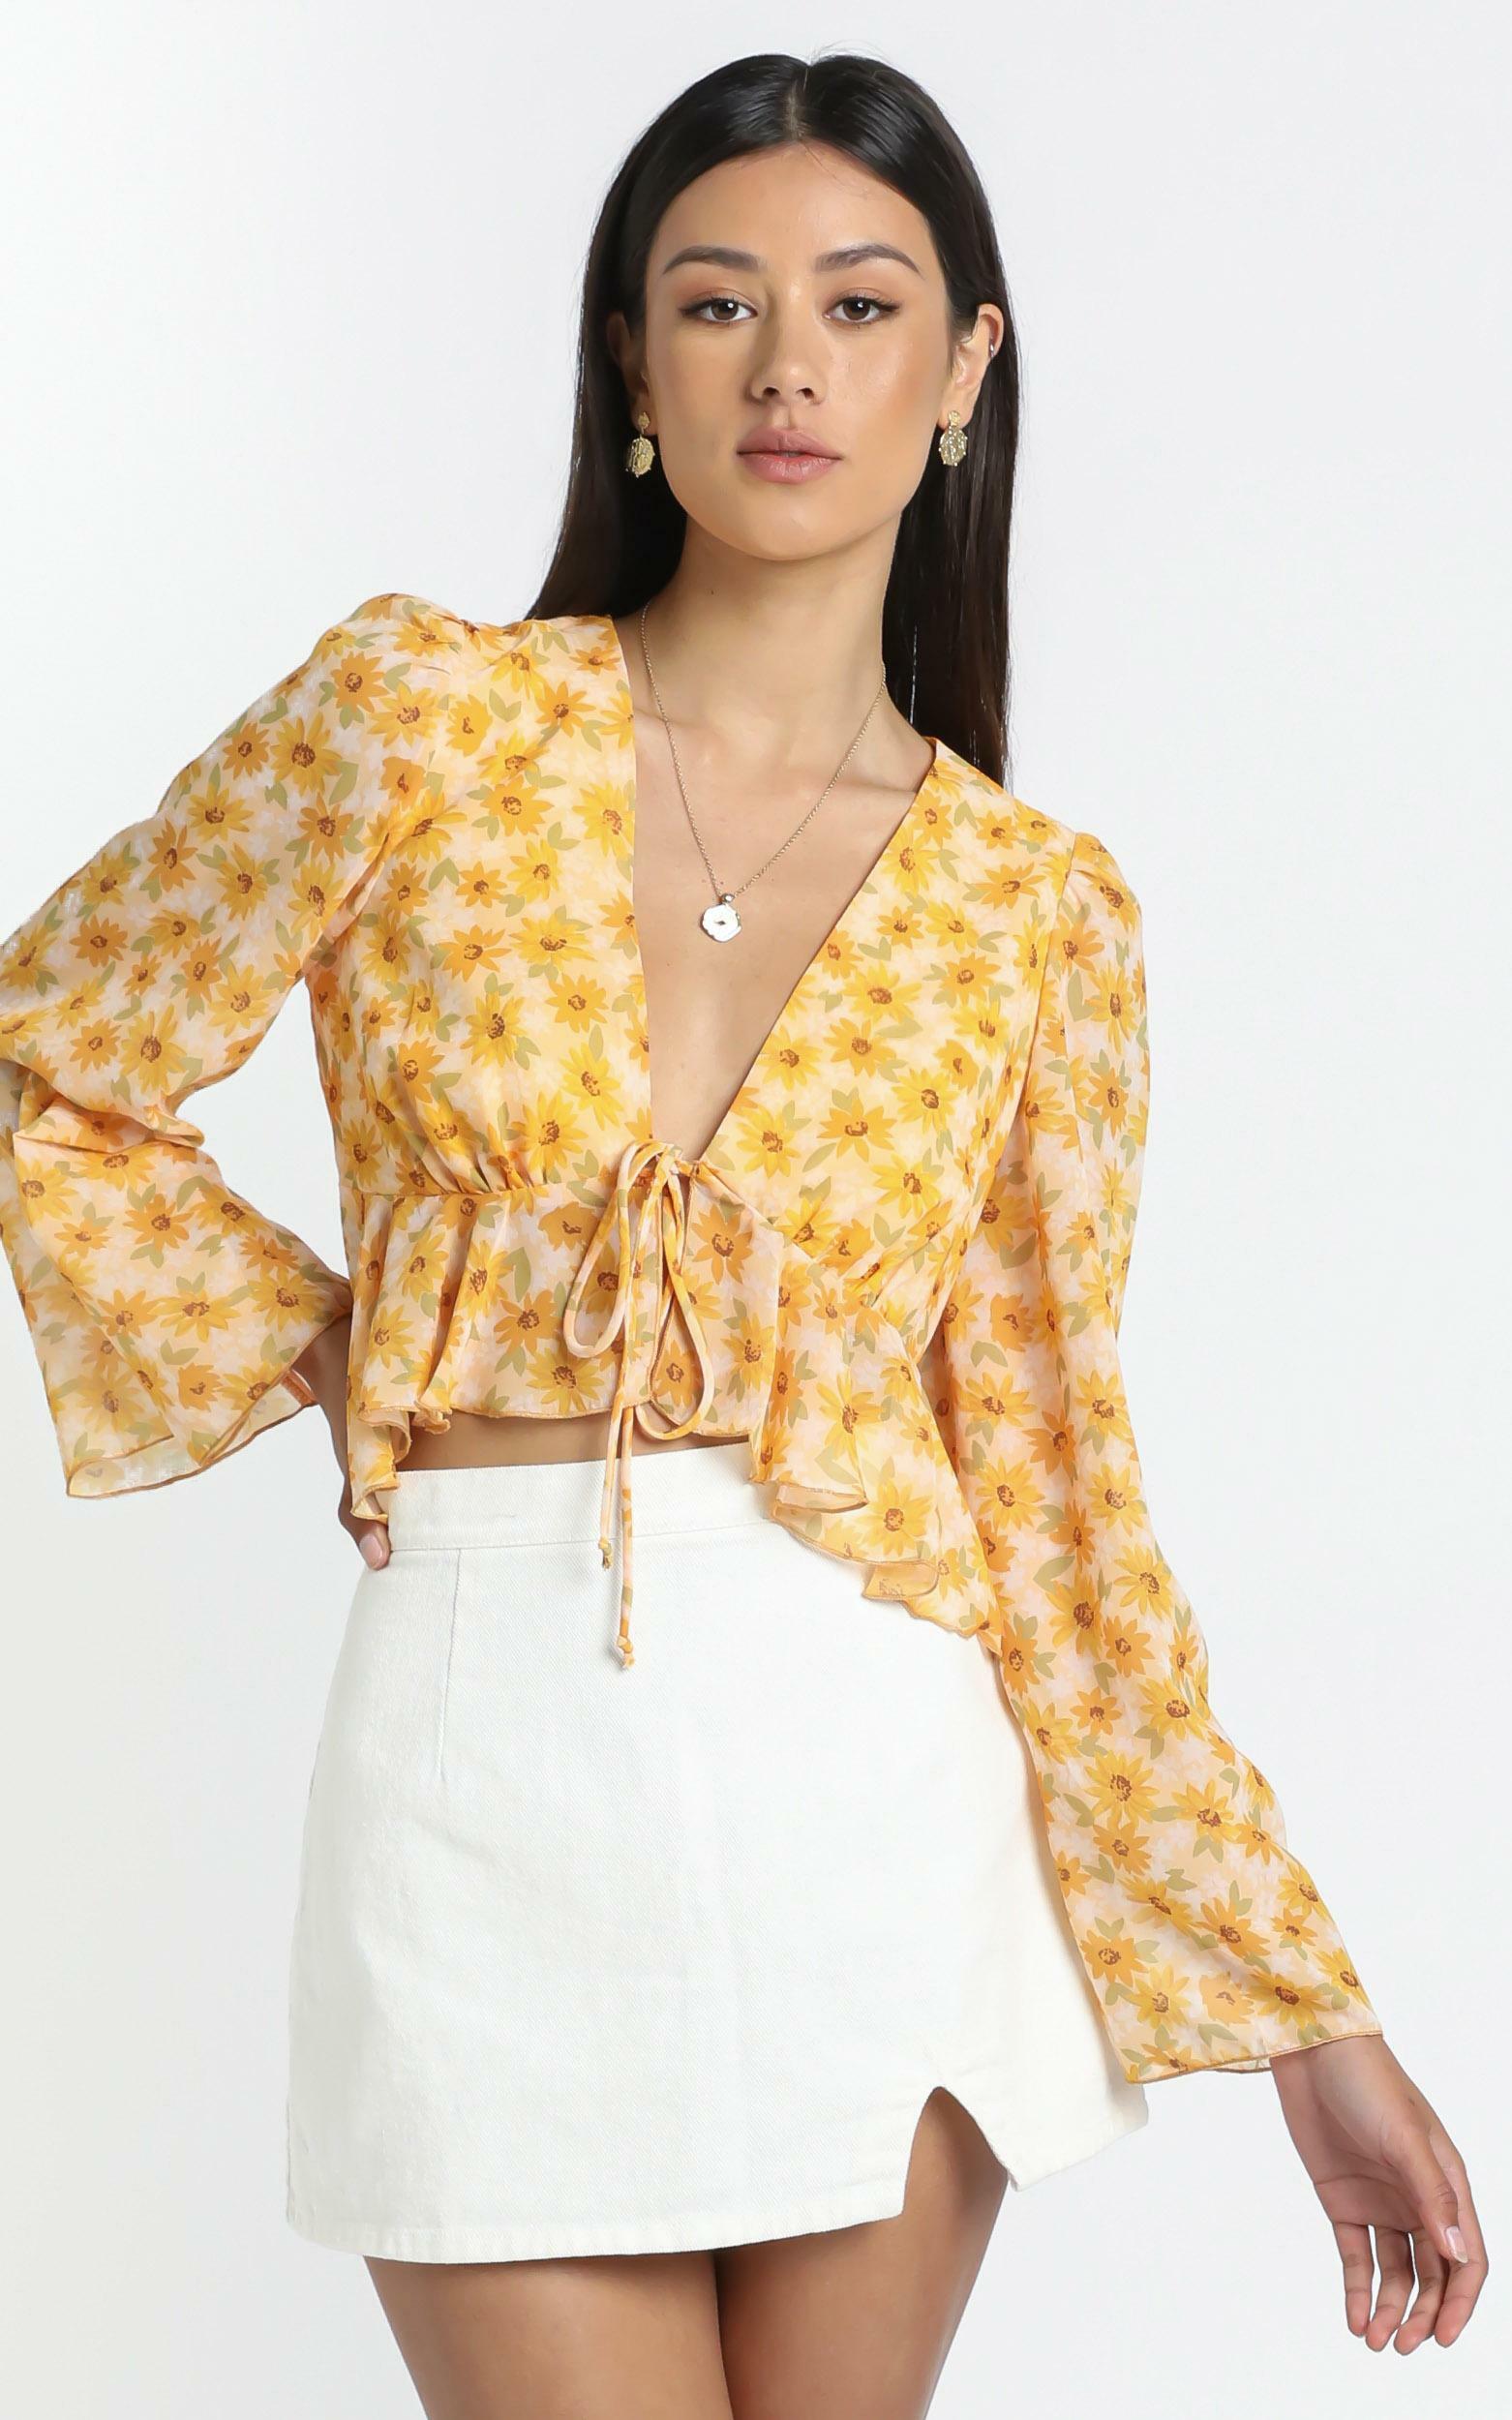 Dance It Out Top in Sunflower - 16 (XXL), Yellow, hi-res image number null